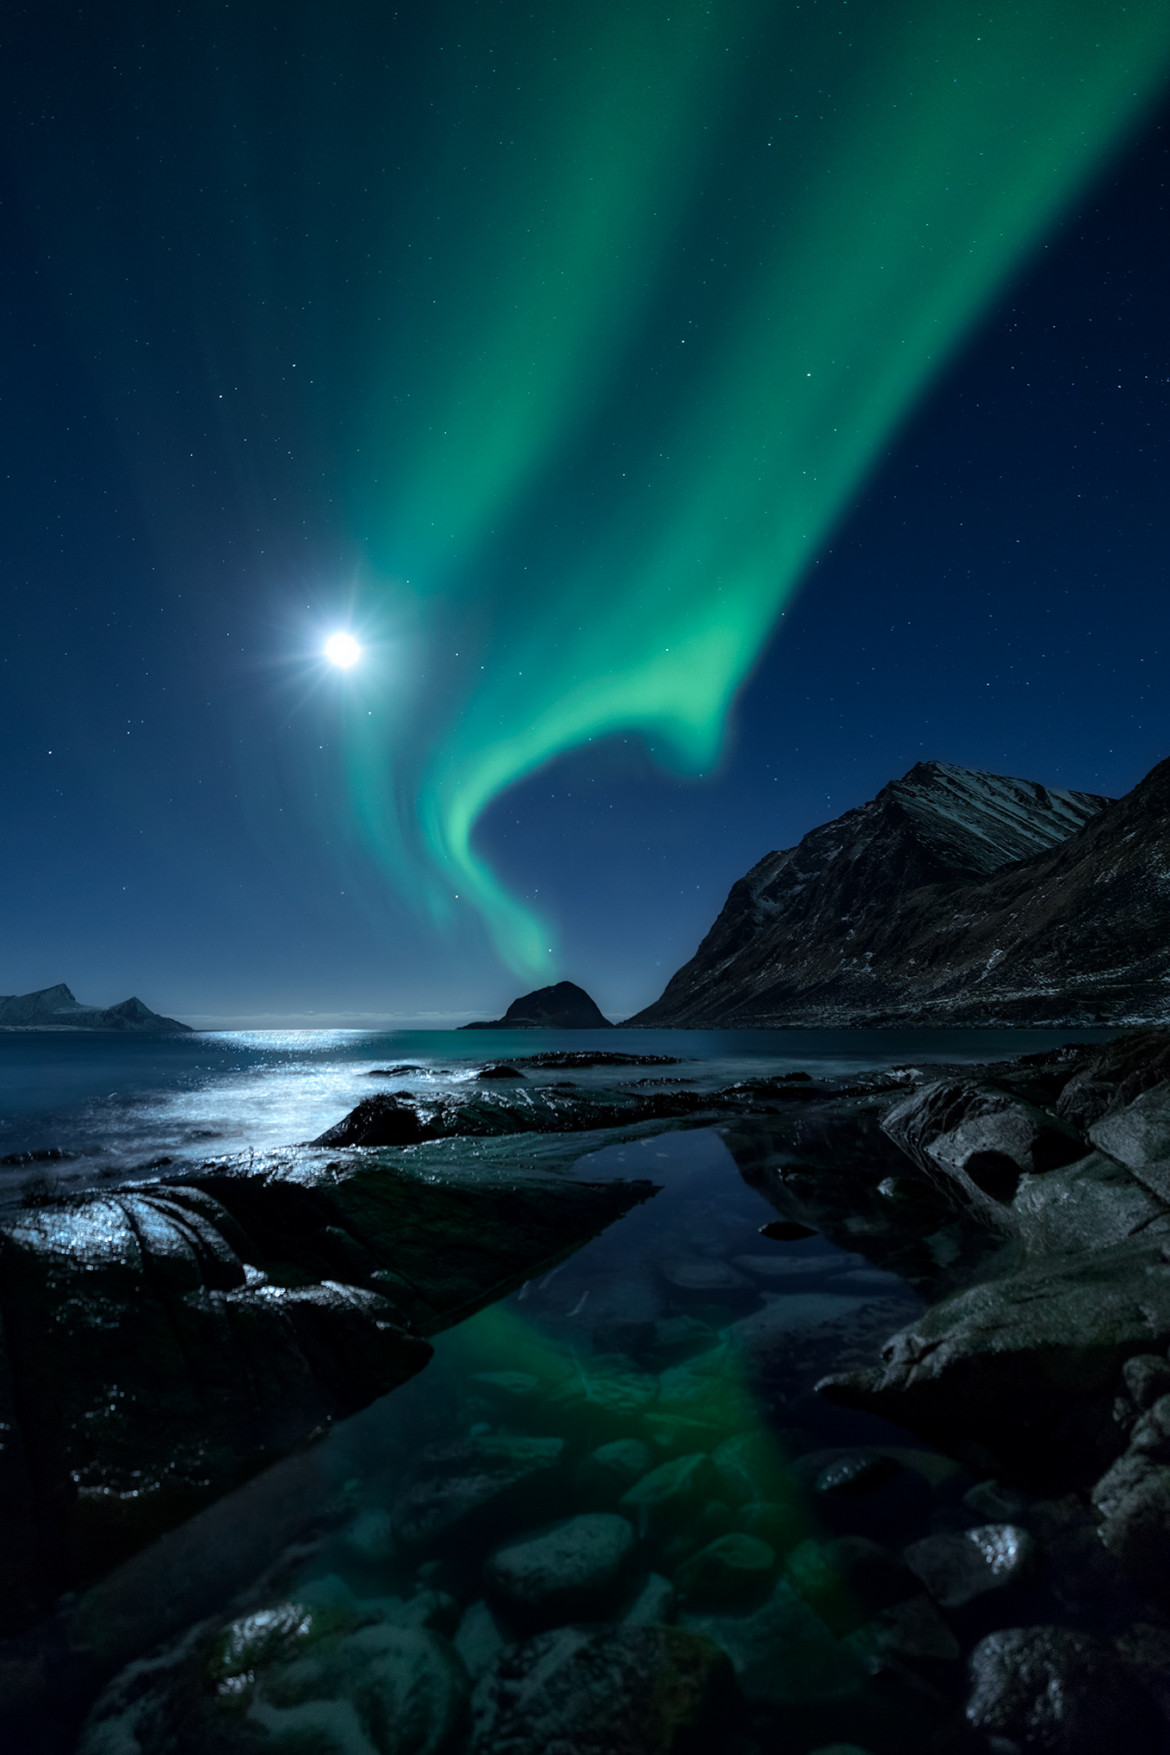 fot. Mikkel Beiter, "Aurorascape" / Insight Investment Astronomy Photographer of the Year 2018